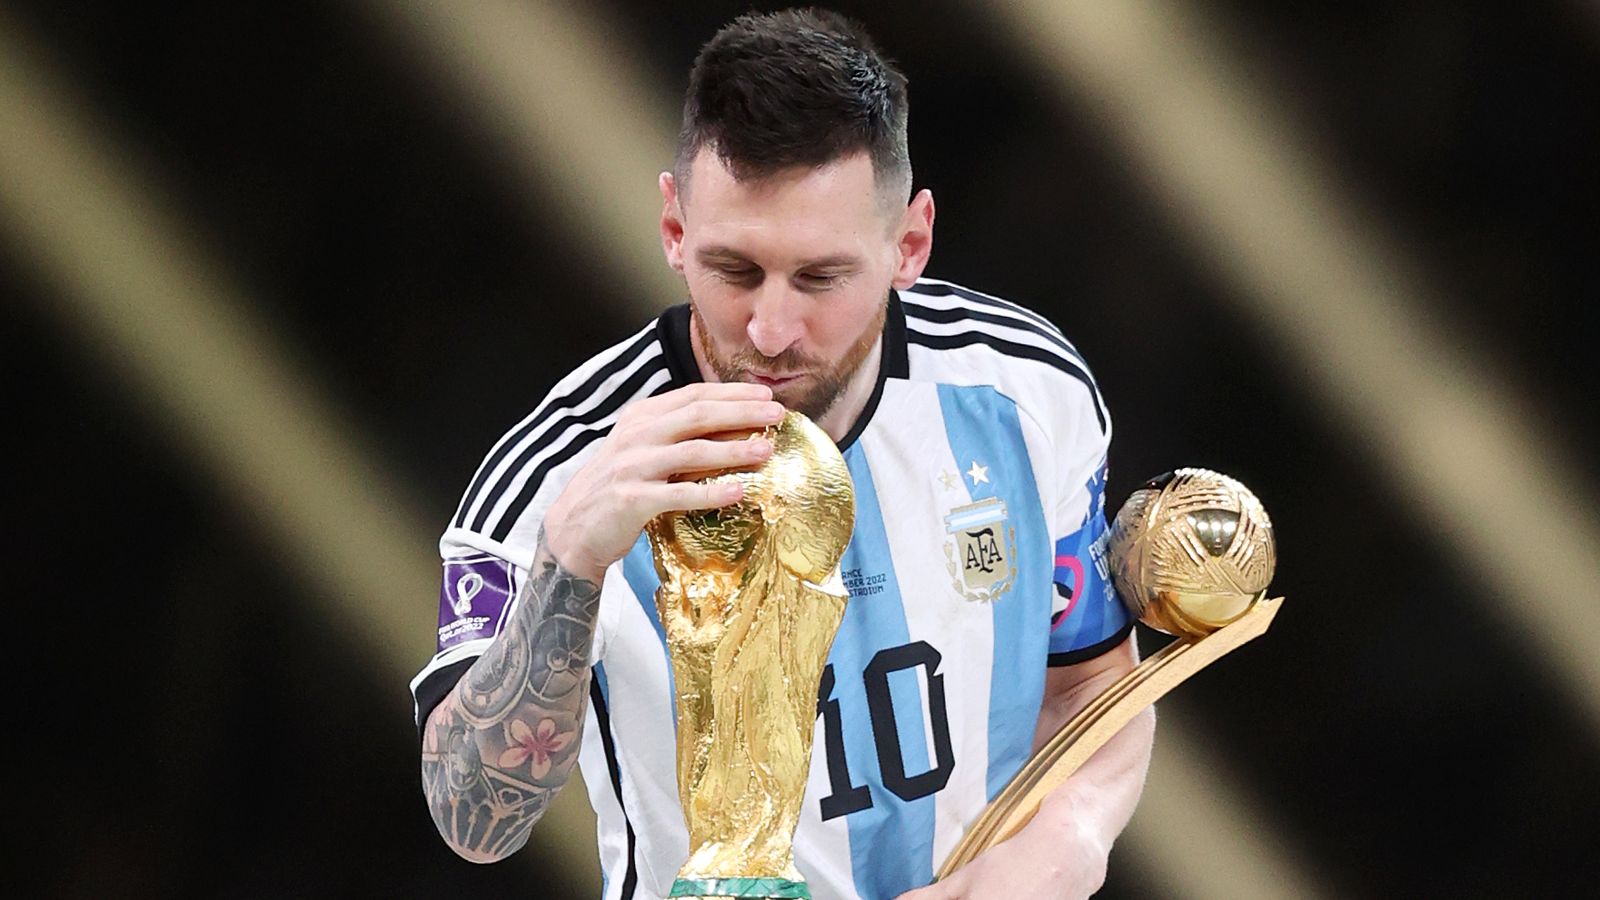 Lionel Messi's World Cup win with Argentina confirms his status as the greatest player of all time | Football News | Sky Sports